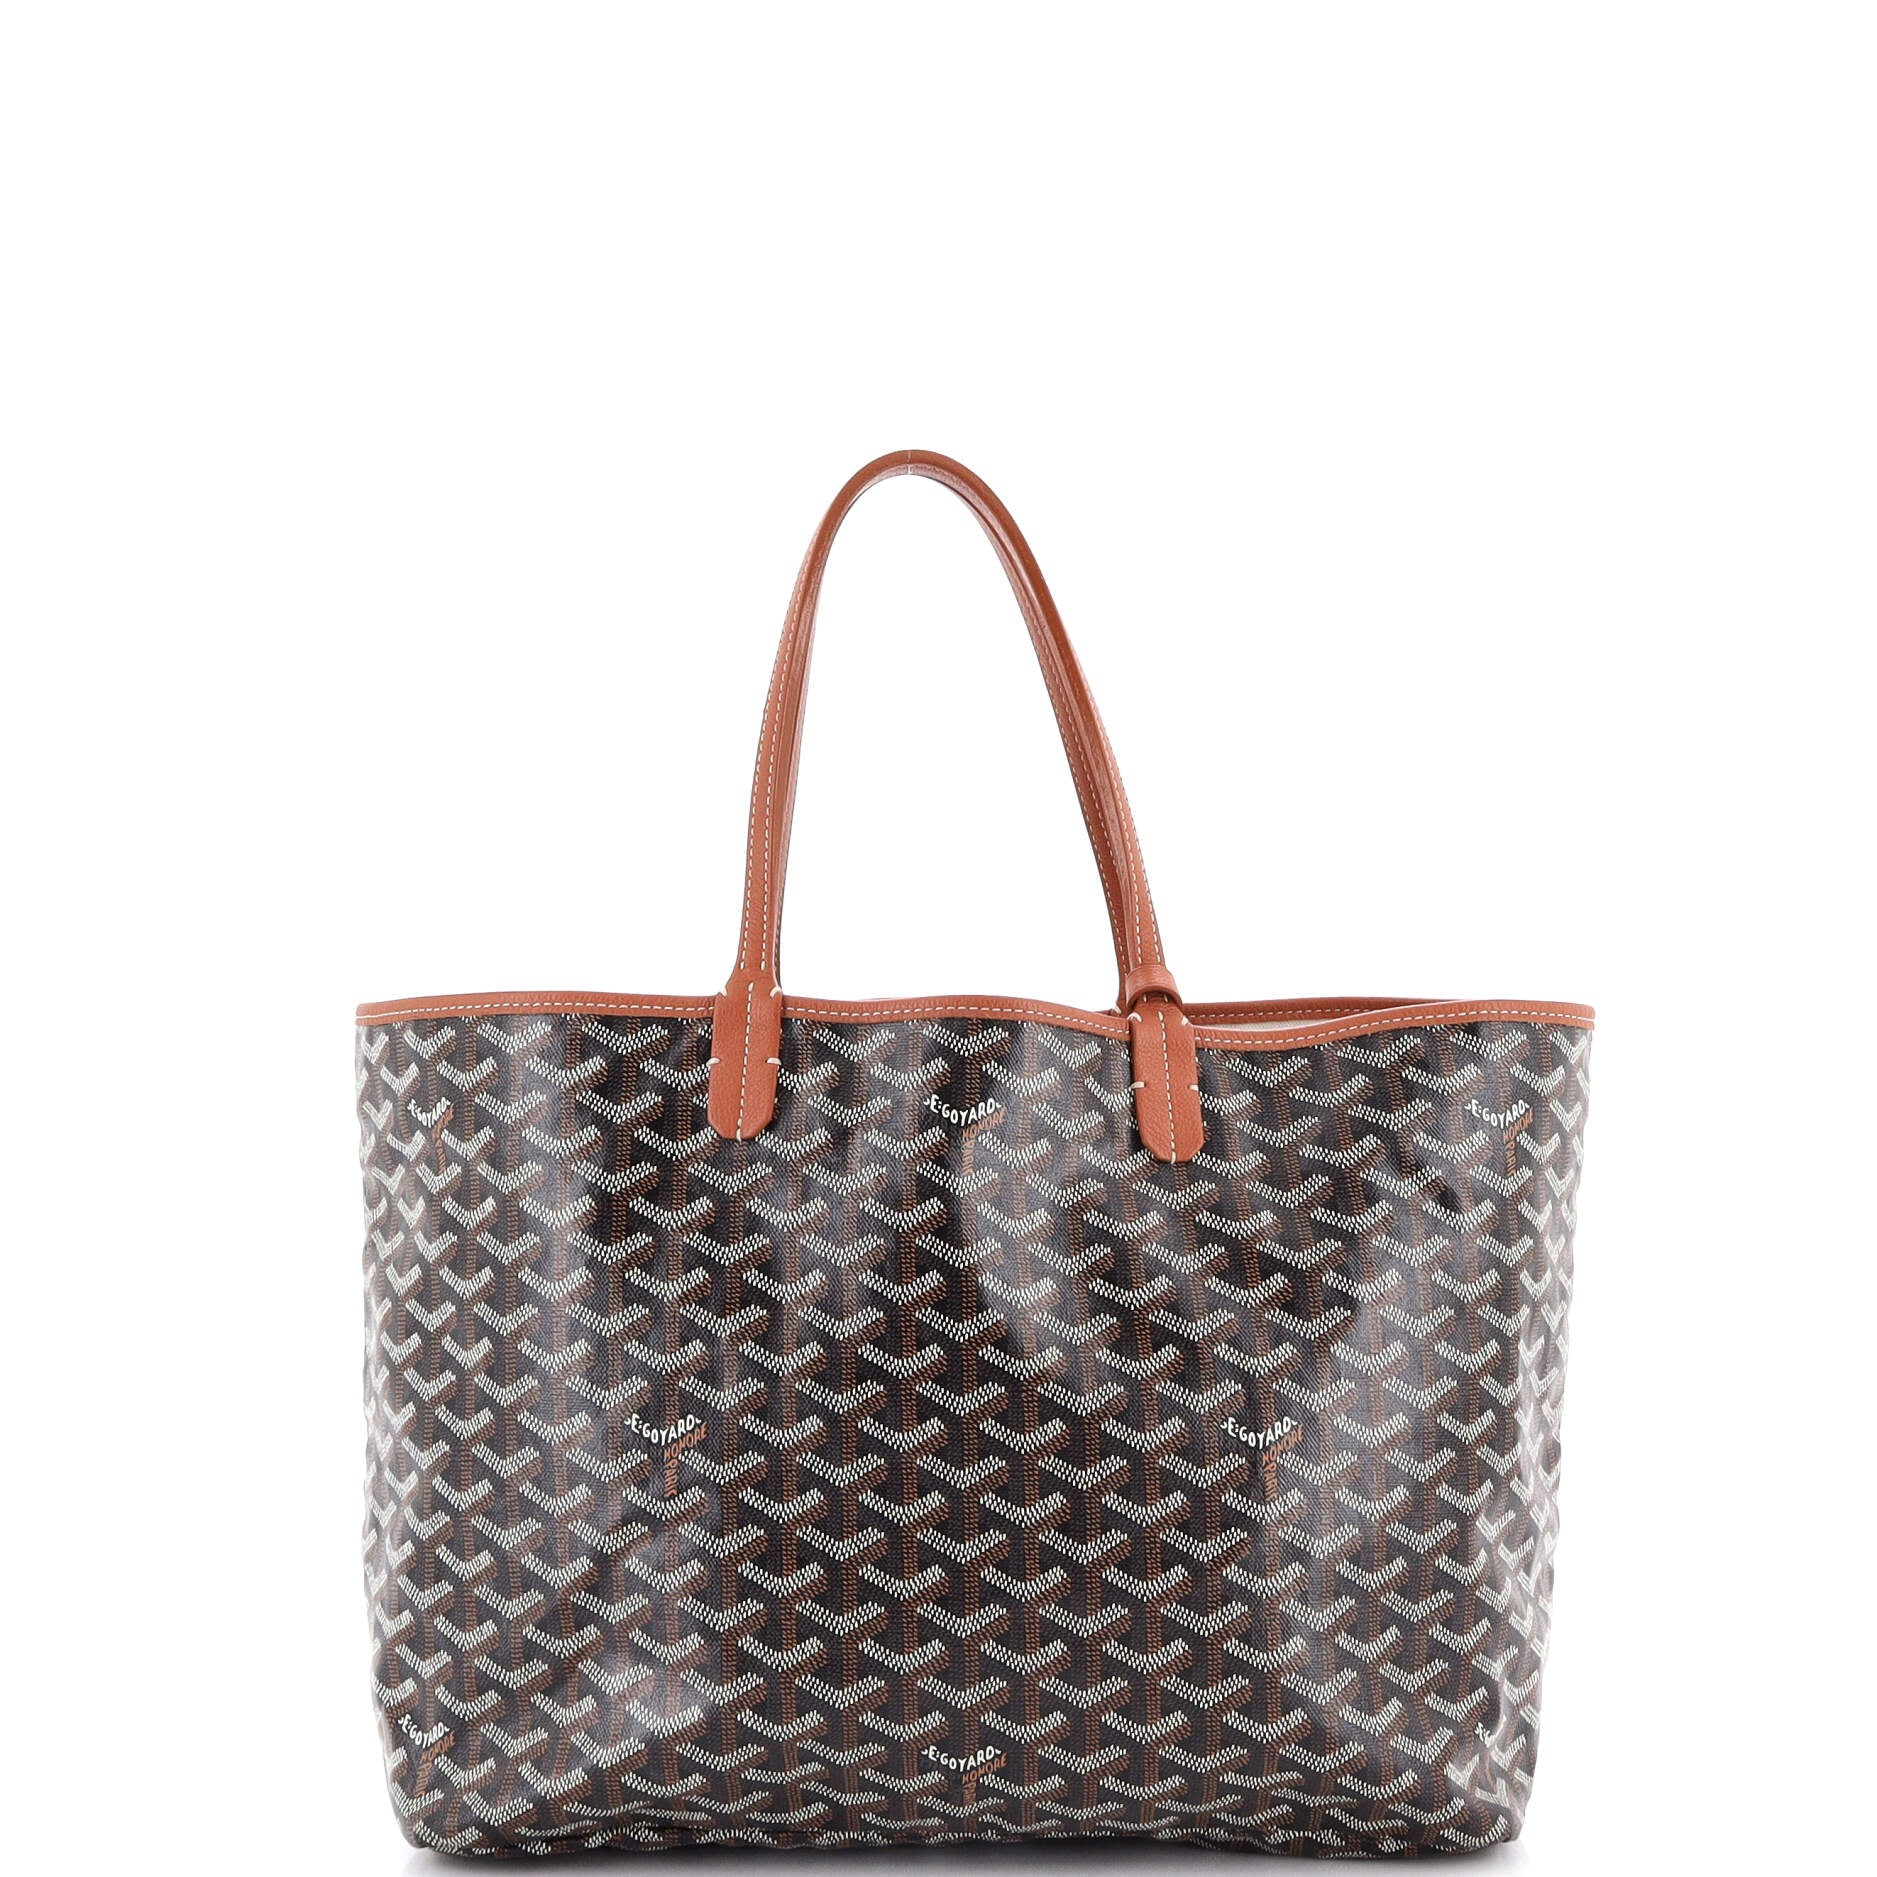 goyard rouette hanbag black canvas black leather, with dust cover